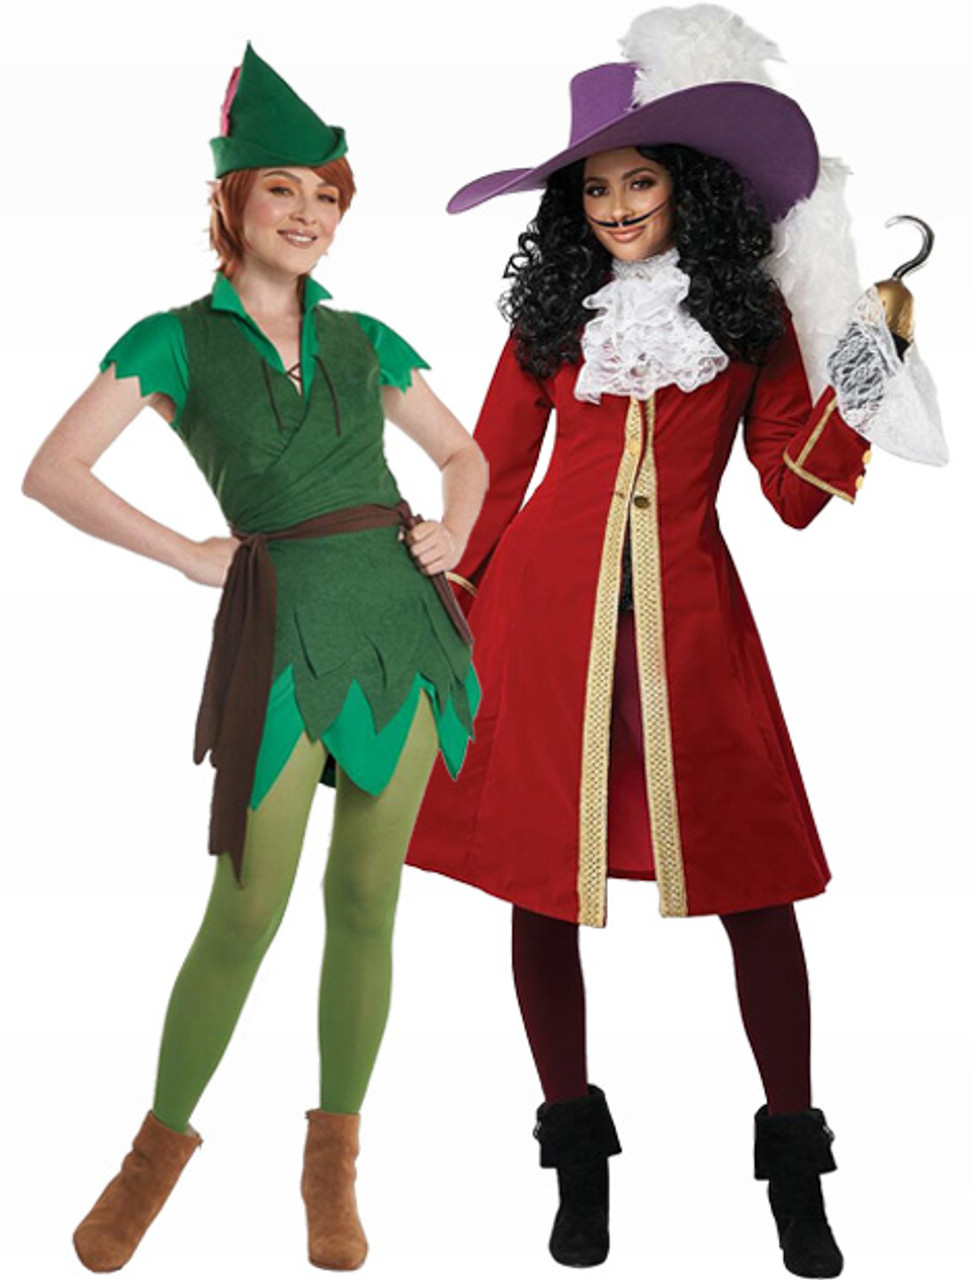 Pan and Hook by MsPepperPotts  Captain hook costume, Peter pan costumes,  Cosplay female